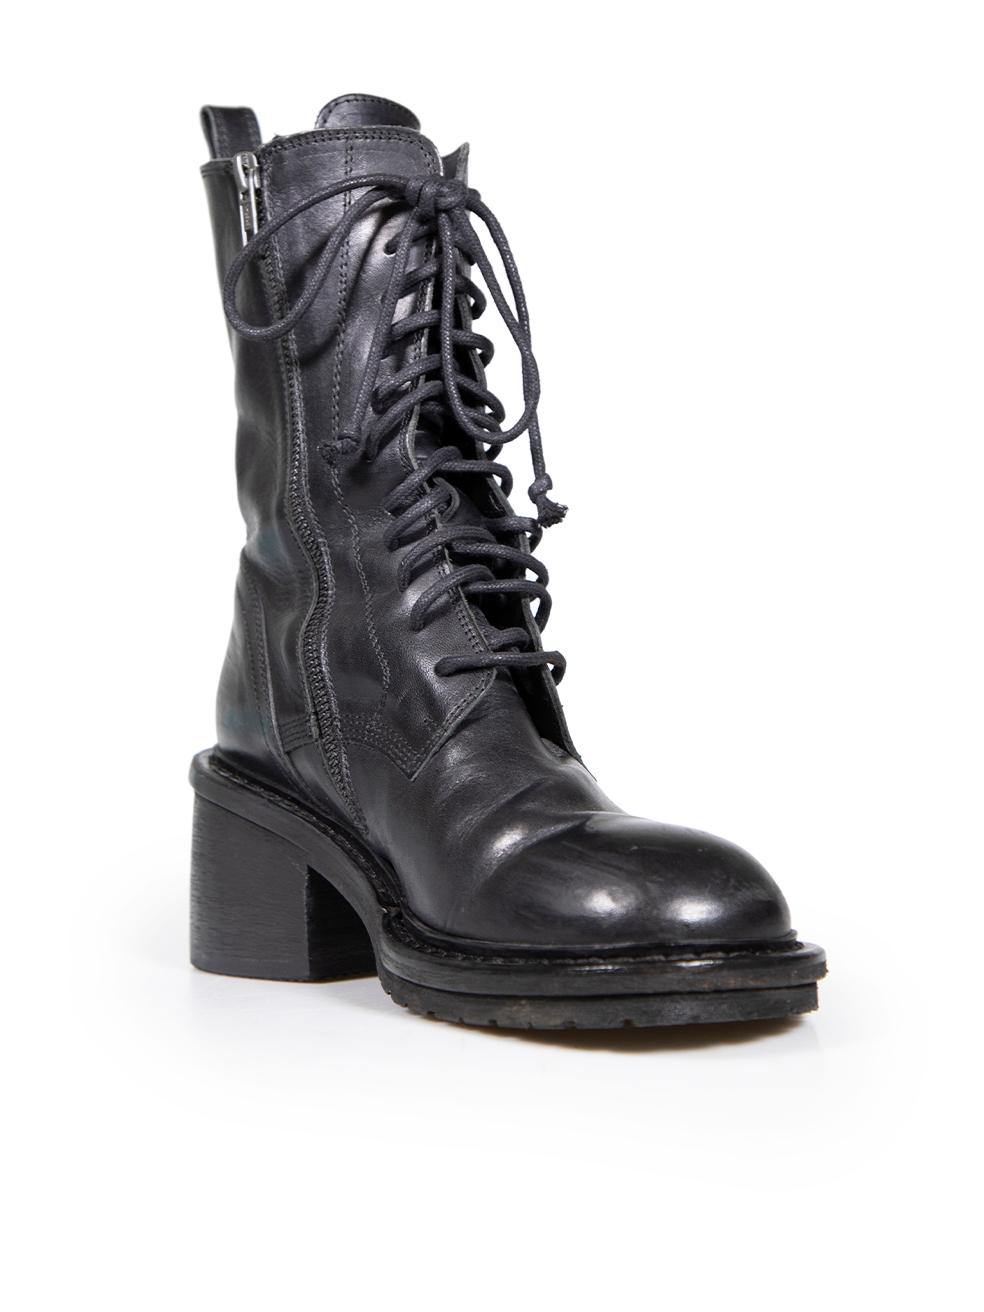 CONDITION is Very good. Minimal wear to boots is evident. Minimal wear to both boot toes and heels with abrasions and general creasing to the leather on this used Ann Demeulemeester designer resale item.
 
 
 
 Details
 
 
 Black
 
 Leather
 
